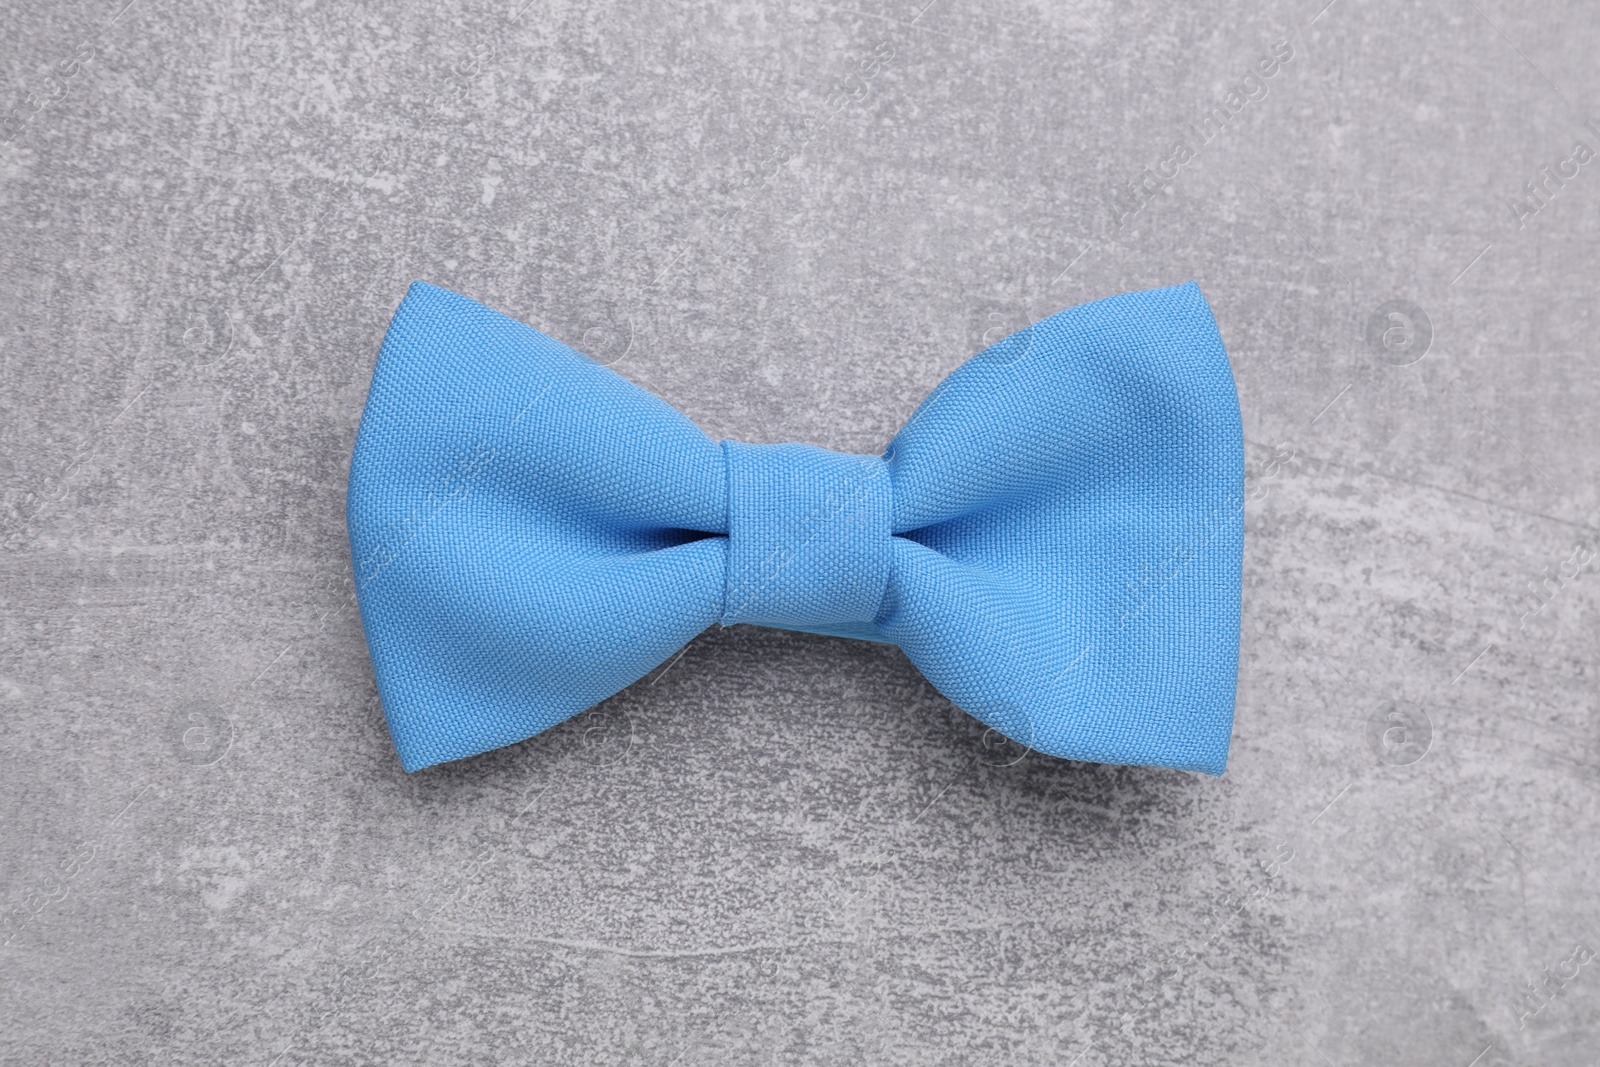 Photo of Stylish color bow tie on light grey table, top view